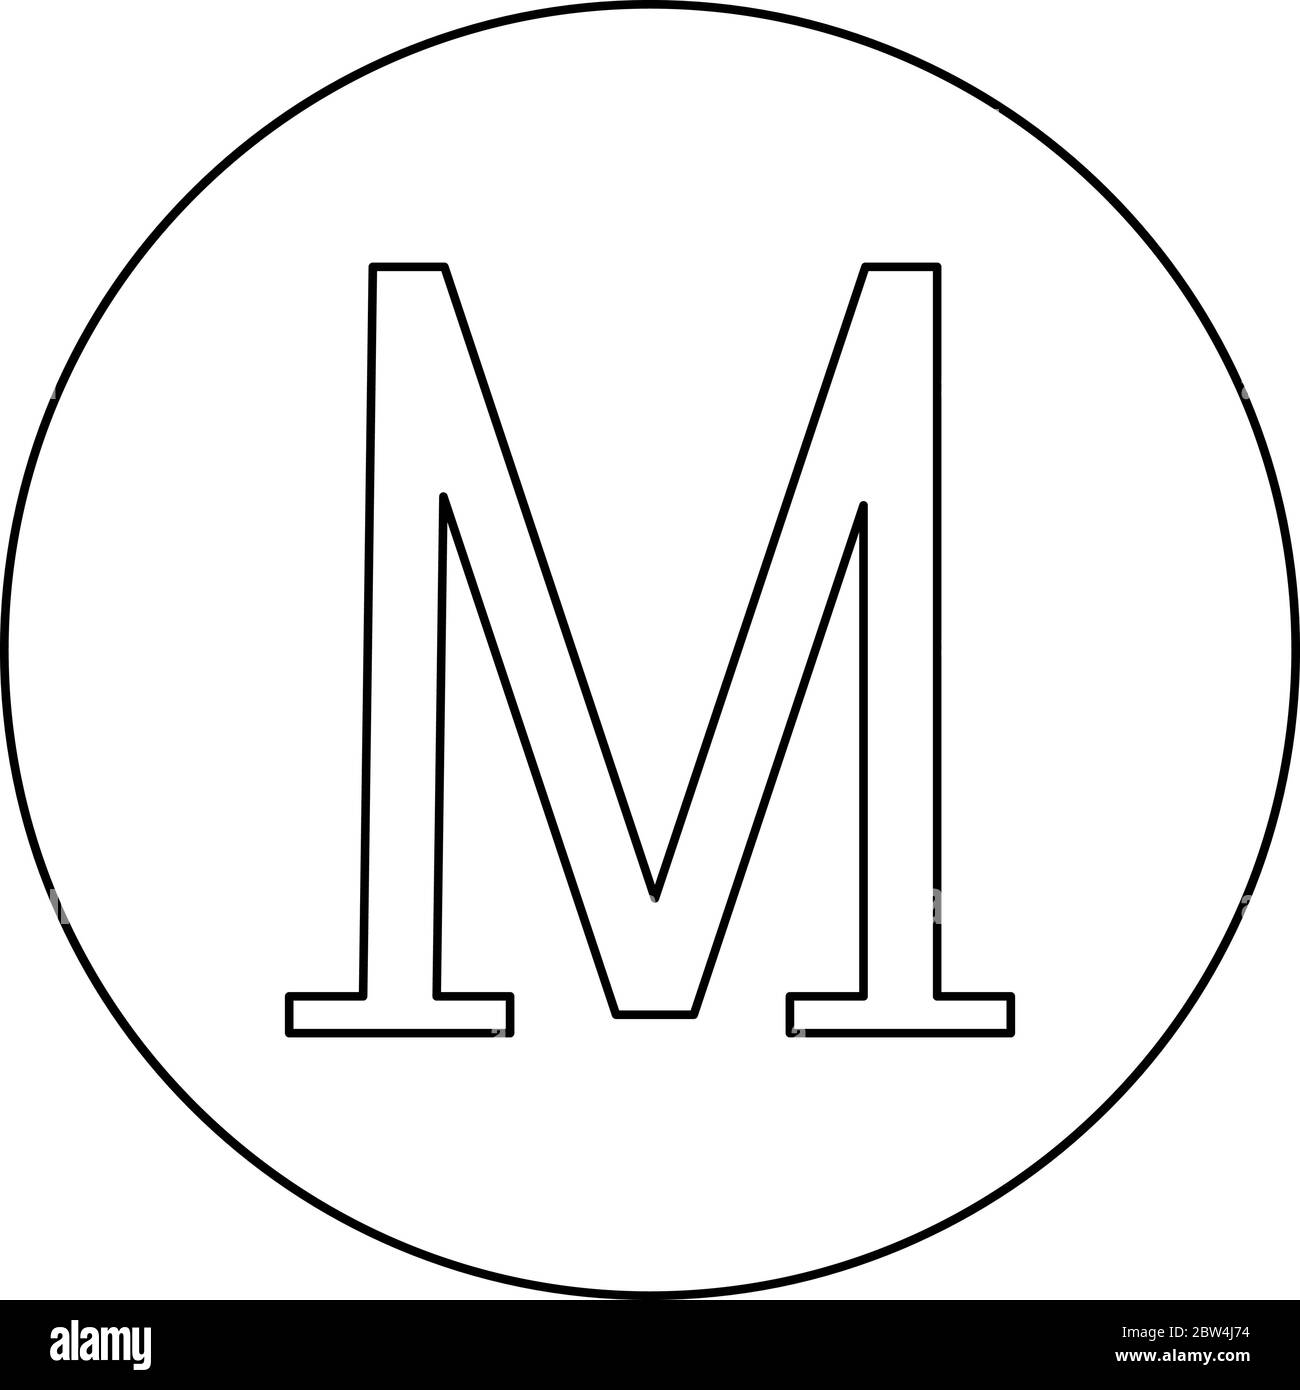 Mu greek symbol capital letter uppercase font icon in circle round outline black color vector illustration flat style simple image Stock Vector